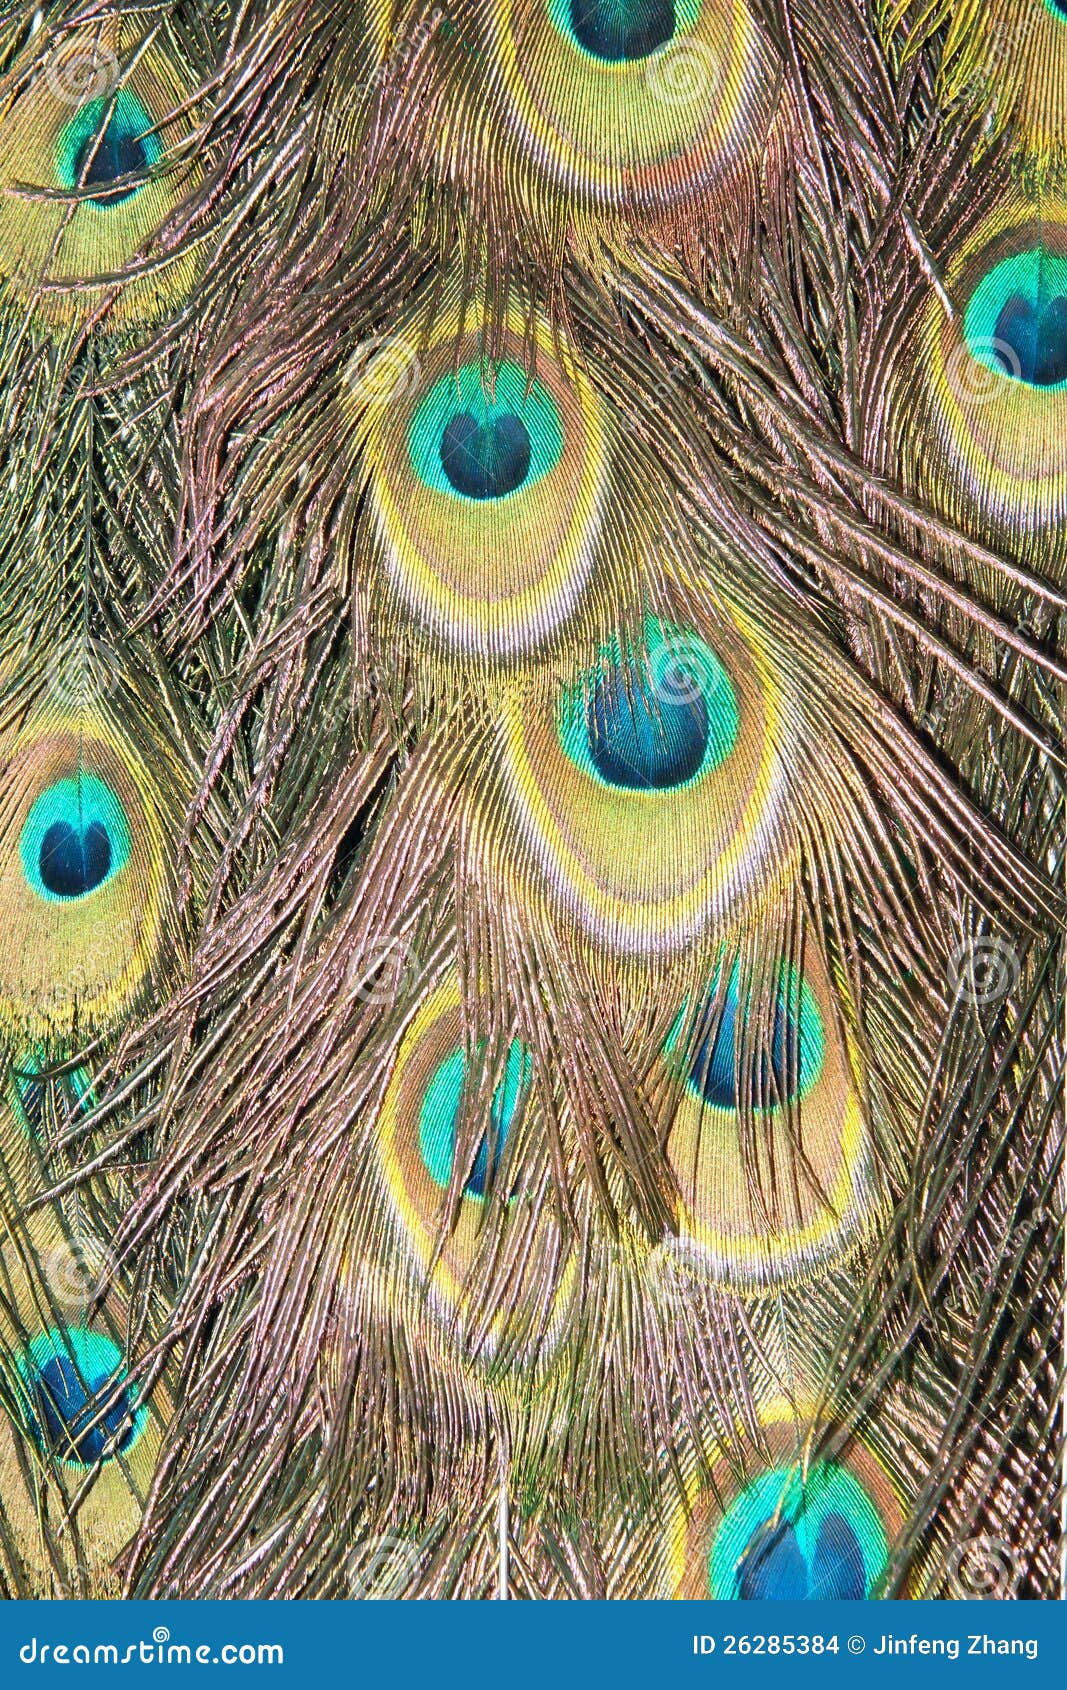 Peacock feathers stock photo. Image of birds, feather - 26285384